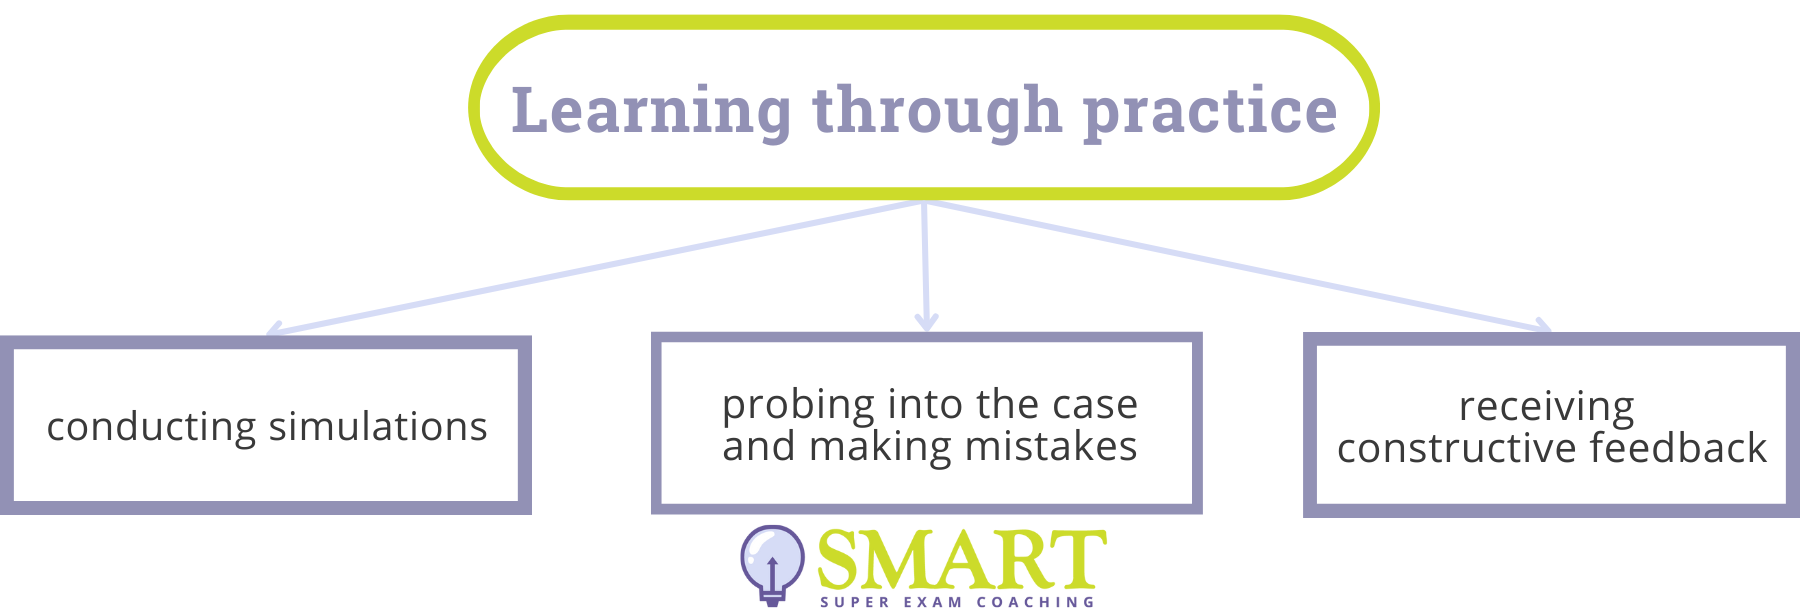 Legal Education - Learning Through Practice